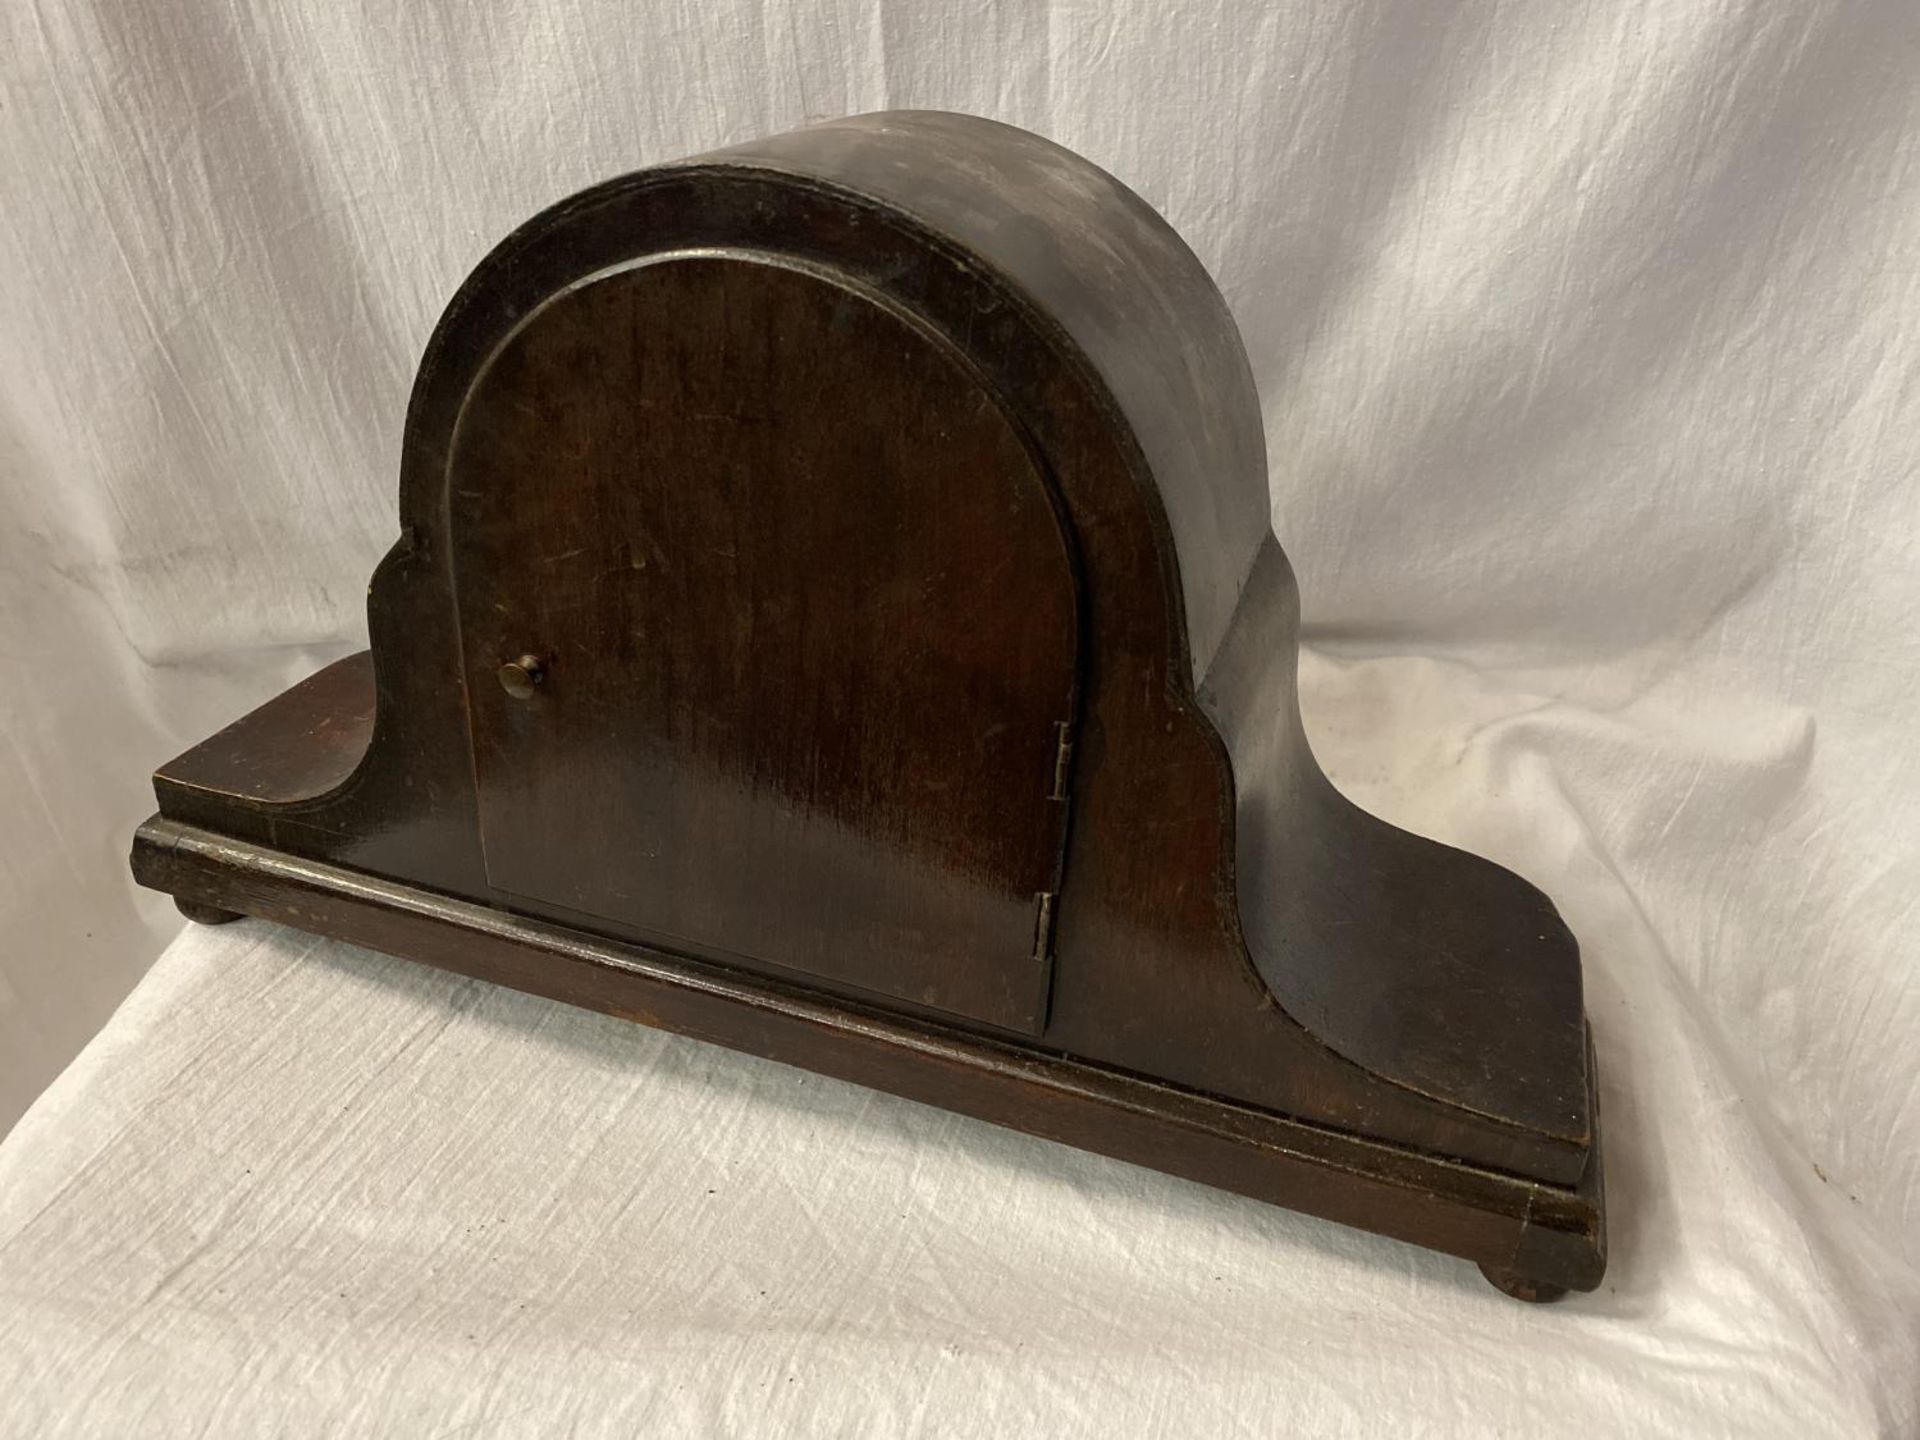 TWO MANTEL CLOCKS, ONE A MAHOGANY NAPOLEON HAT EXAMPLE AND THE OTHER AN ART DECO STYLE - Image 7 of 8